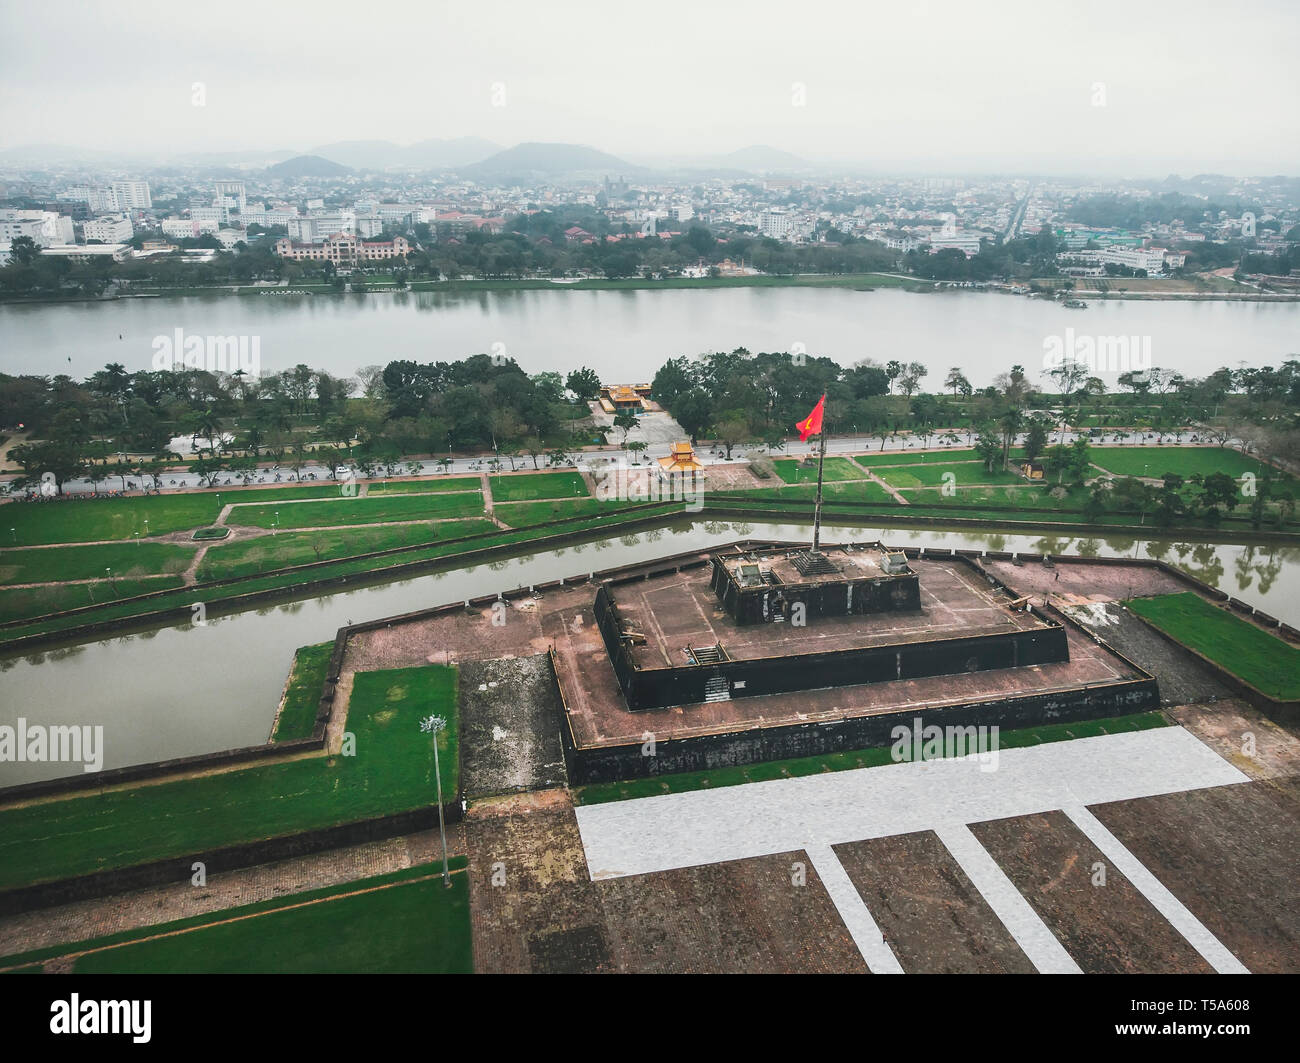 The Vietnam flag, waving on top of the stage, in front of the Imperial Palace in Heu, Vietnam. Aerial shot Stock Photo